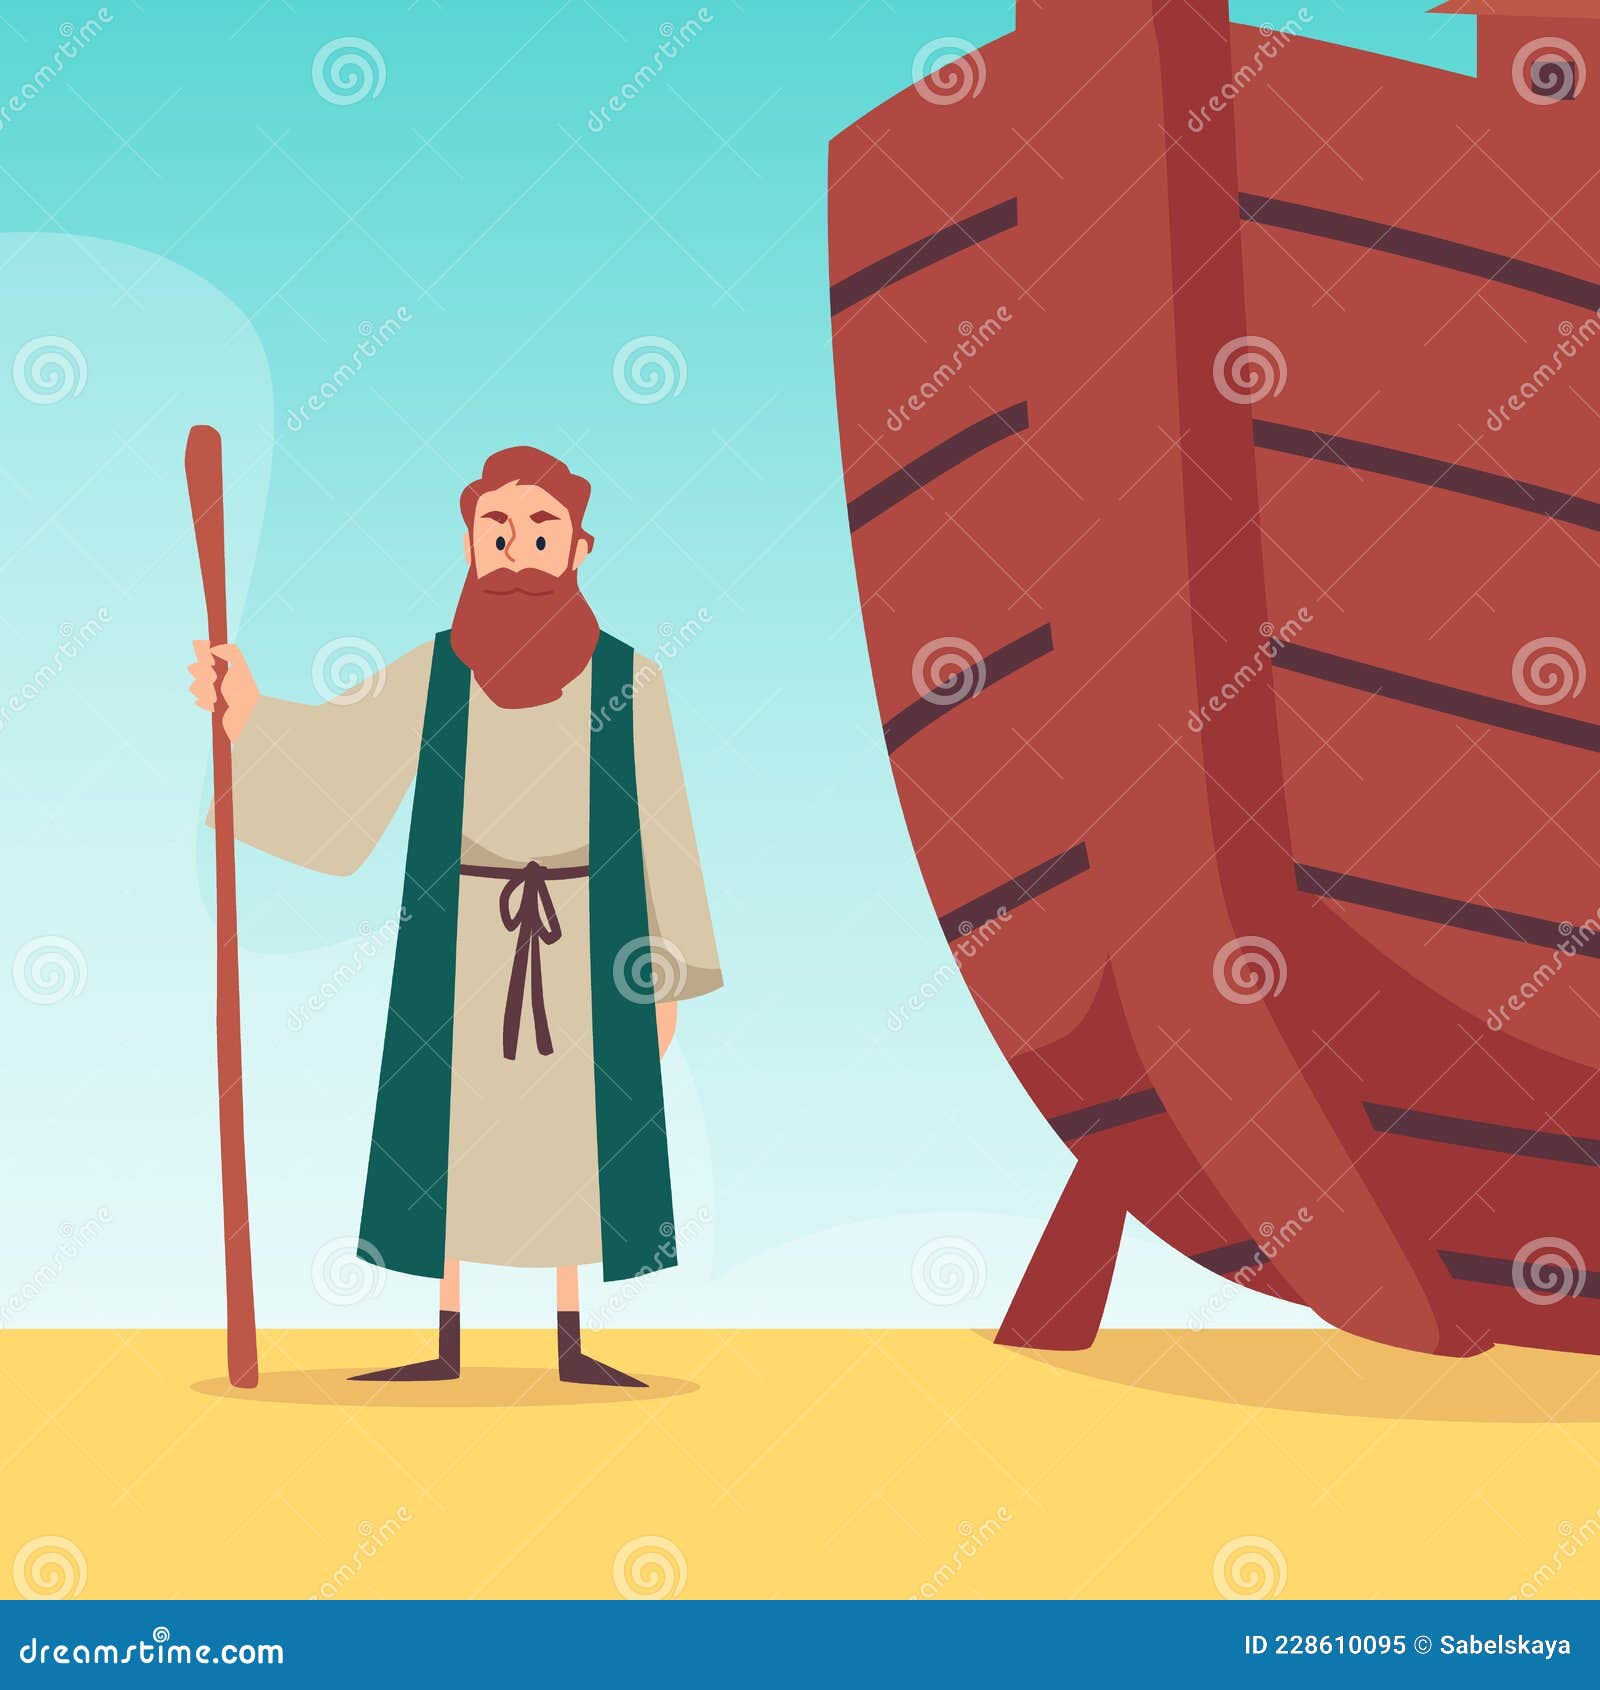 Bible Banner with Noah Standing Near His Ark, Flat Vector Illustration ...